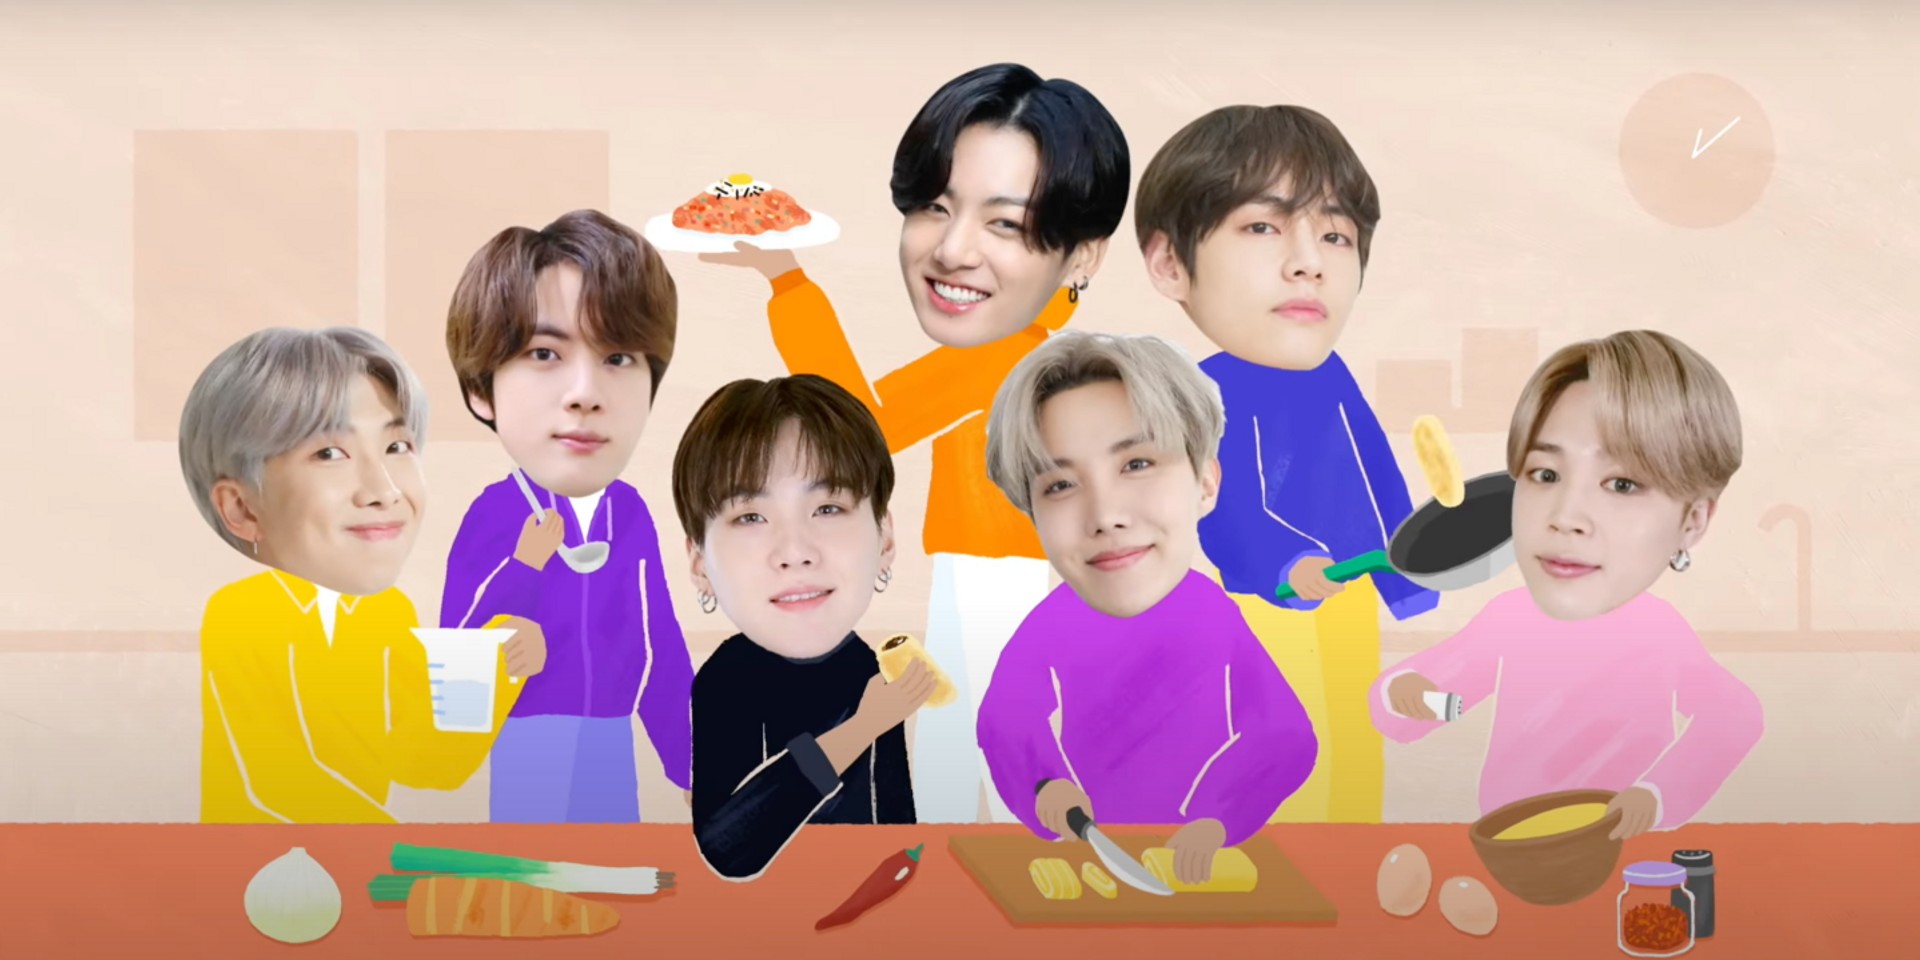 Cook BTS' favourite dishes with 'BTS RECIPE BOOK'